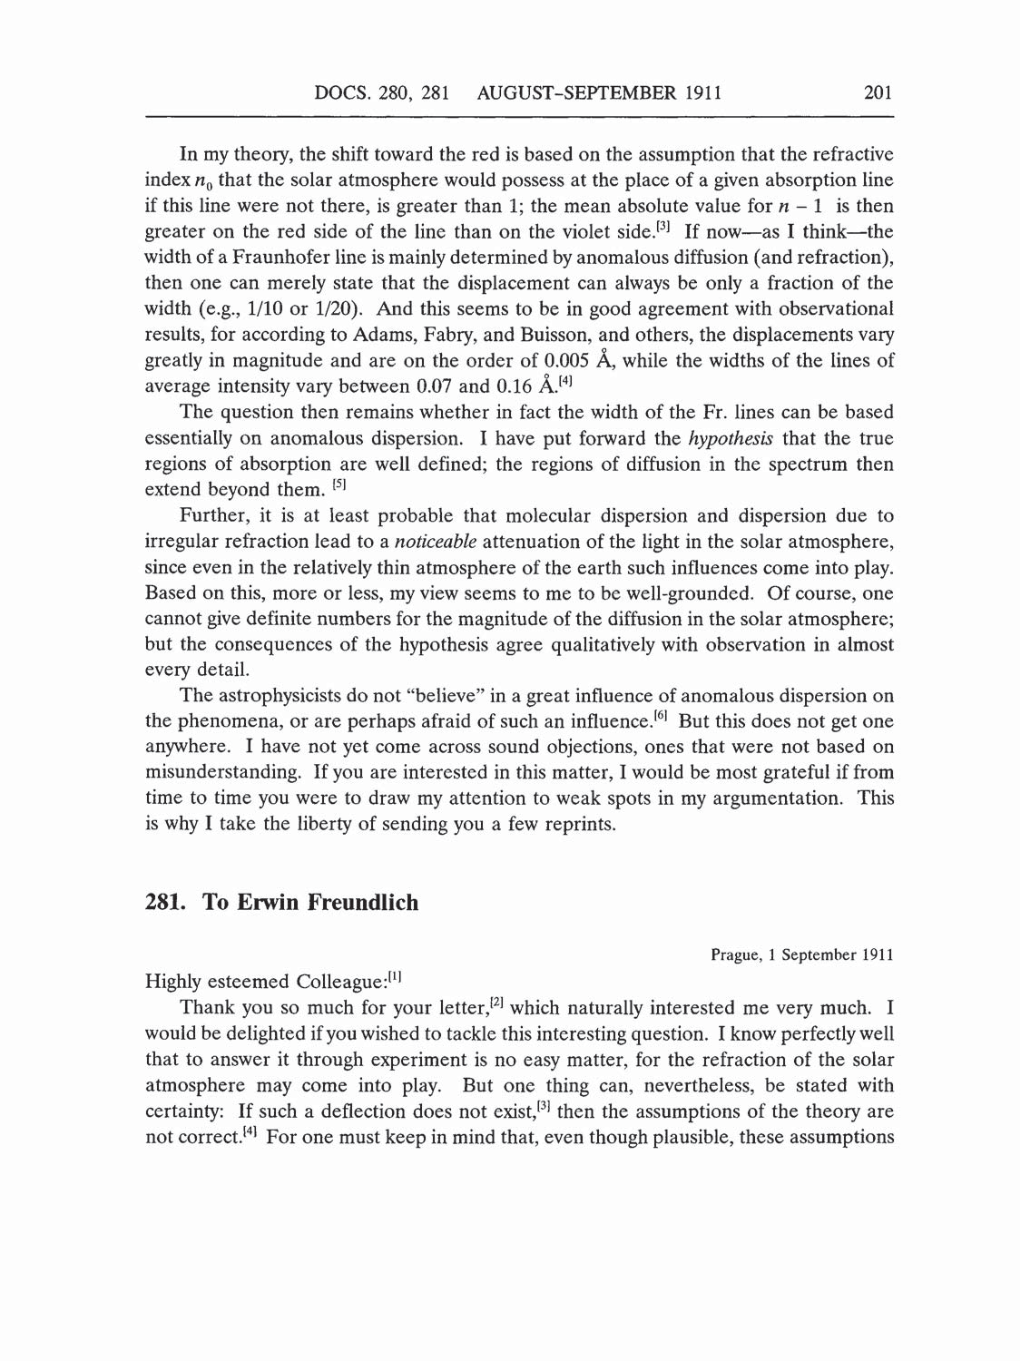 Volume 5: The Swiss Years: Correspondence, 1902-1914 (English translation supplement) page 201